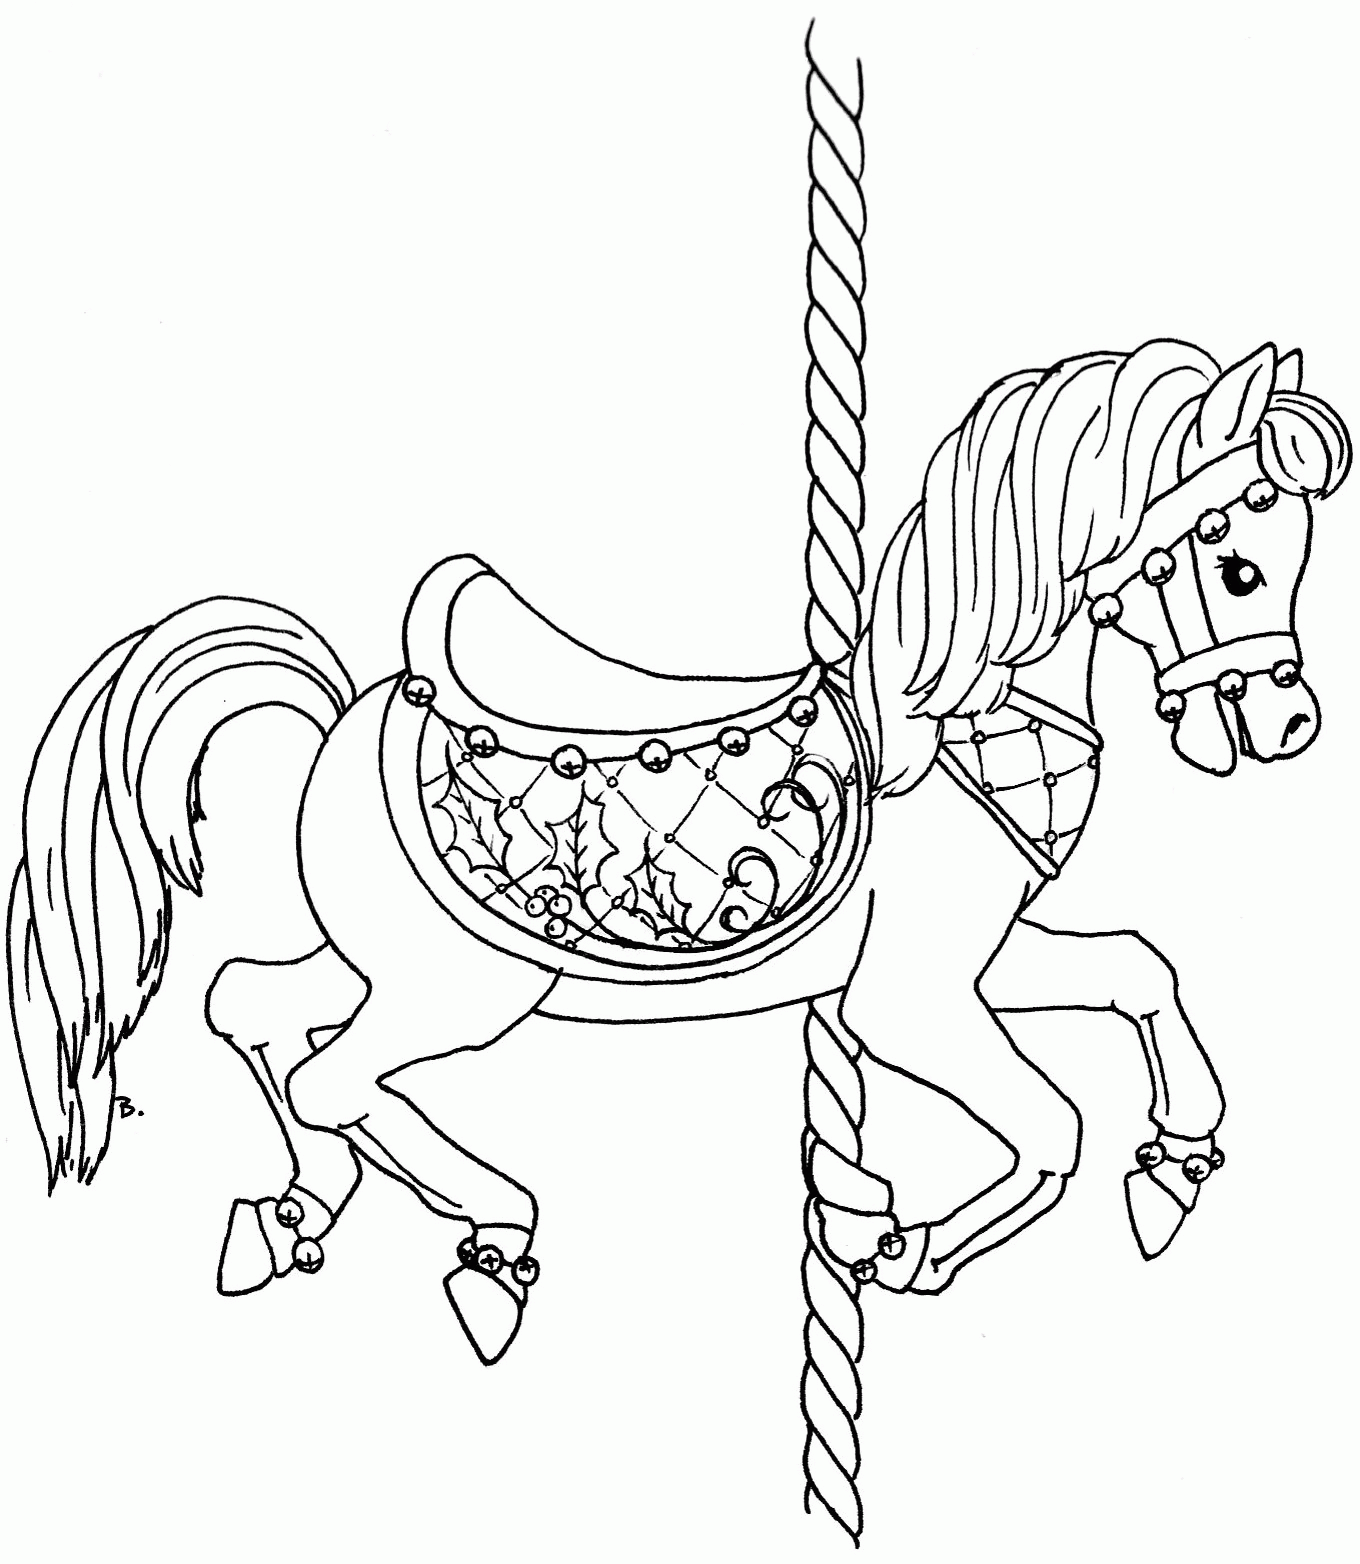 Carousel Horse Coloring Pages To Print  Coloring Home